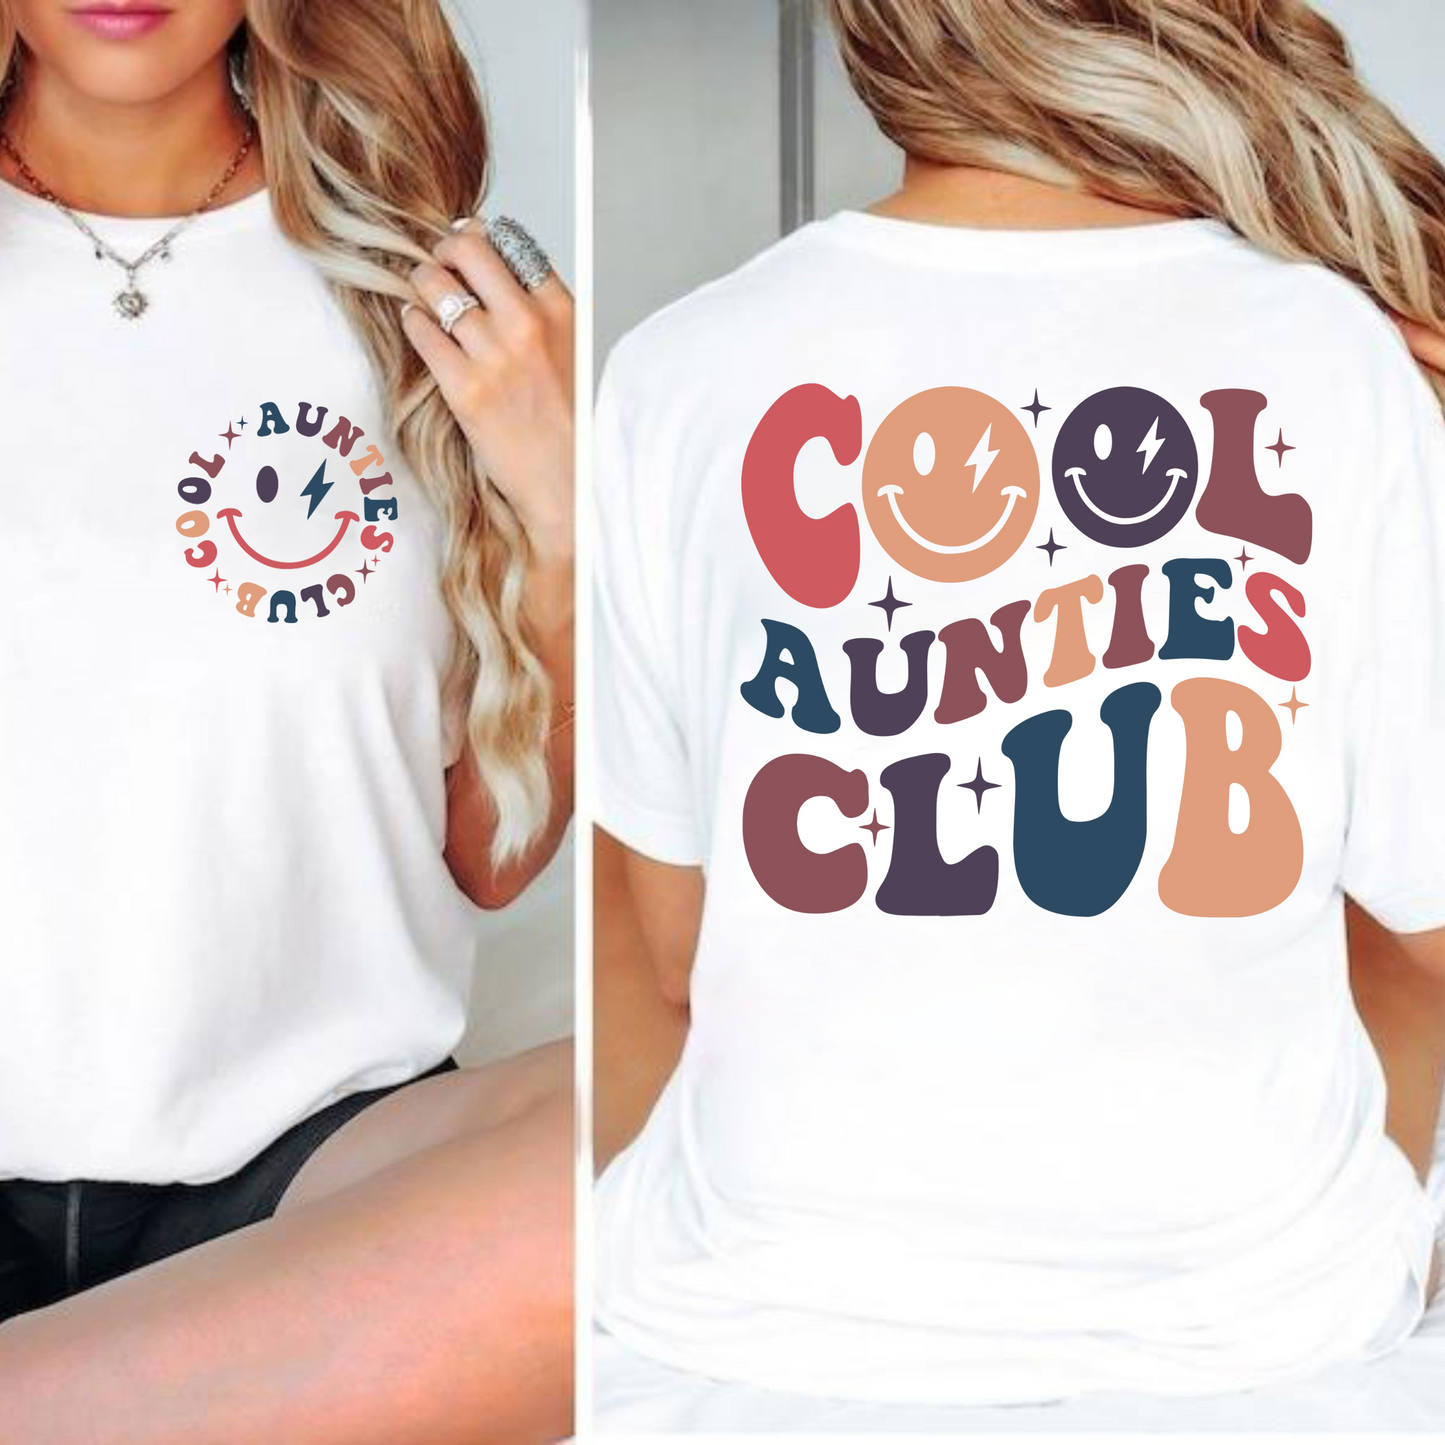 Cool Aunties Club - Celebrating the Joyful Spirits in the Family